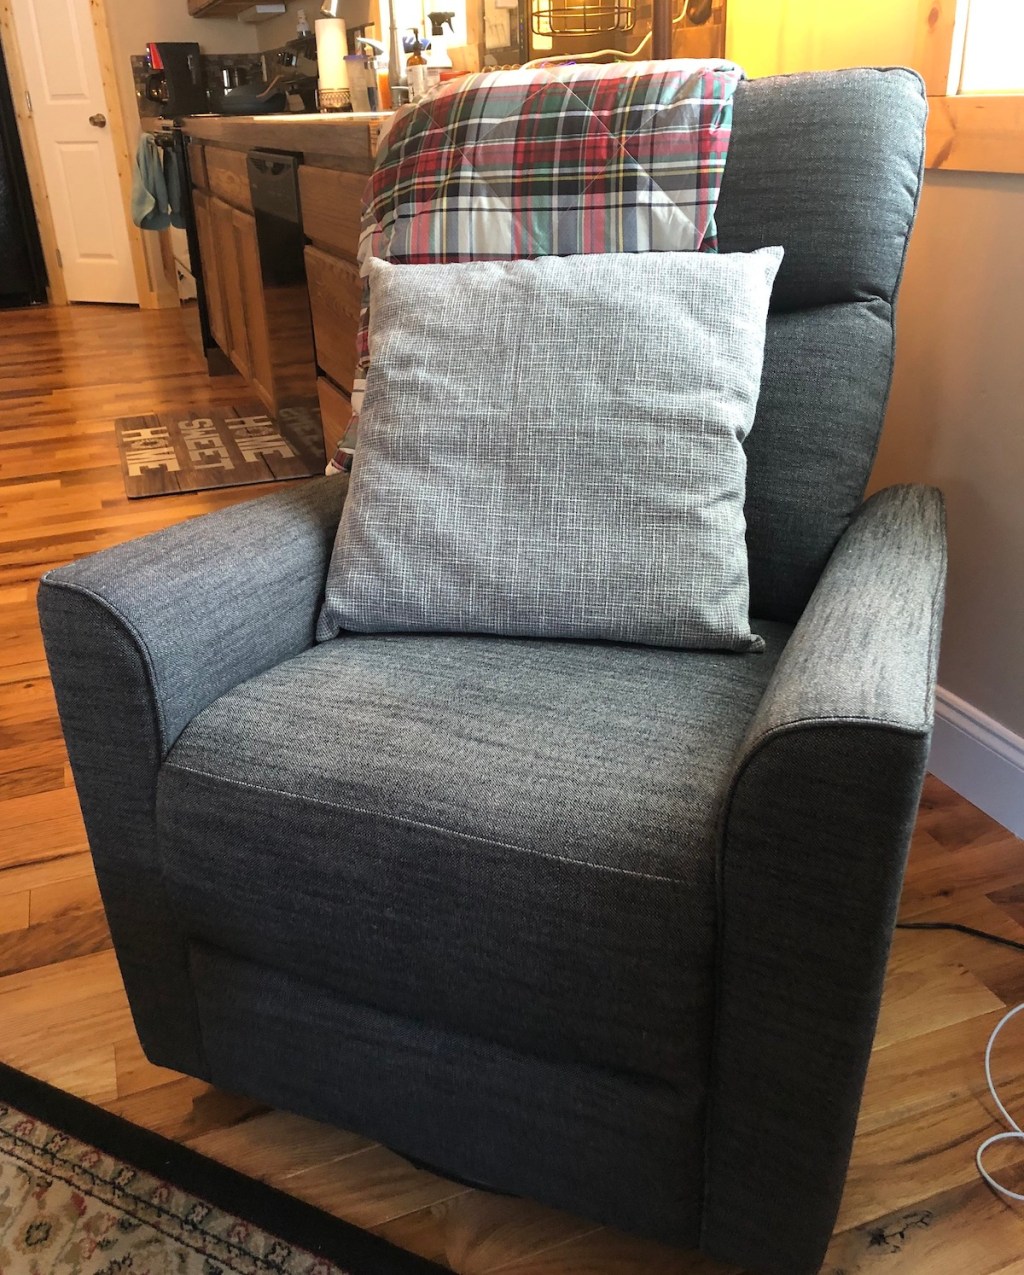 glider chair with throw pillow and plaid blanket